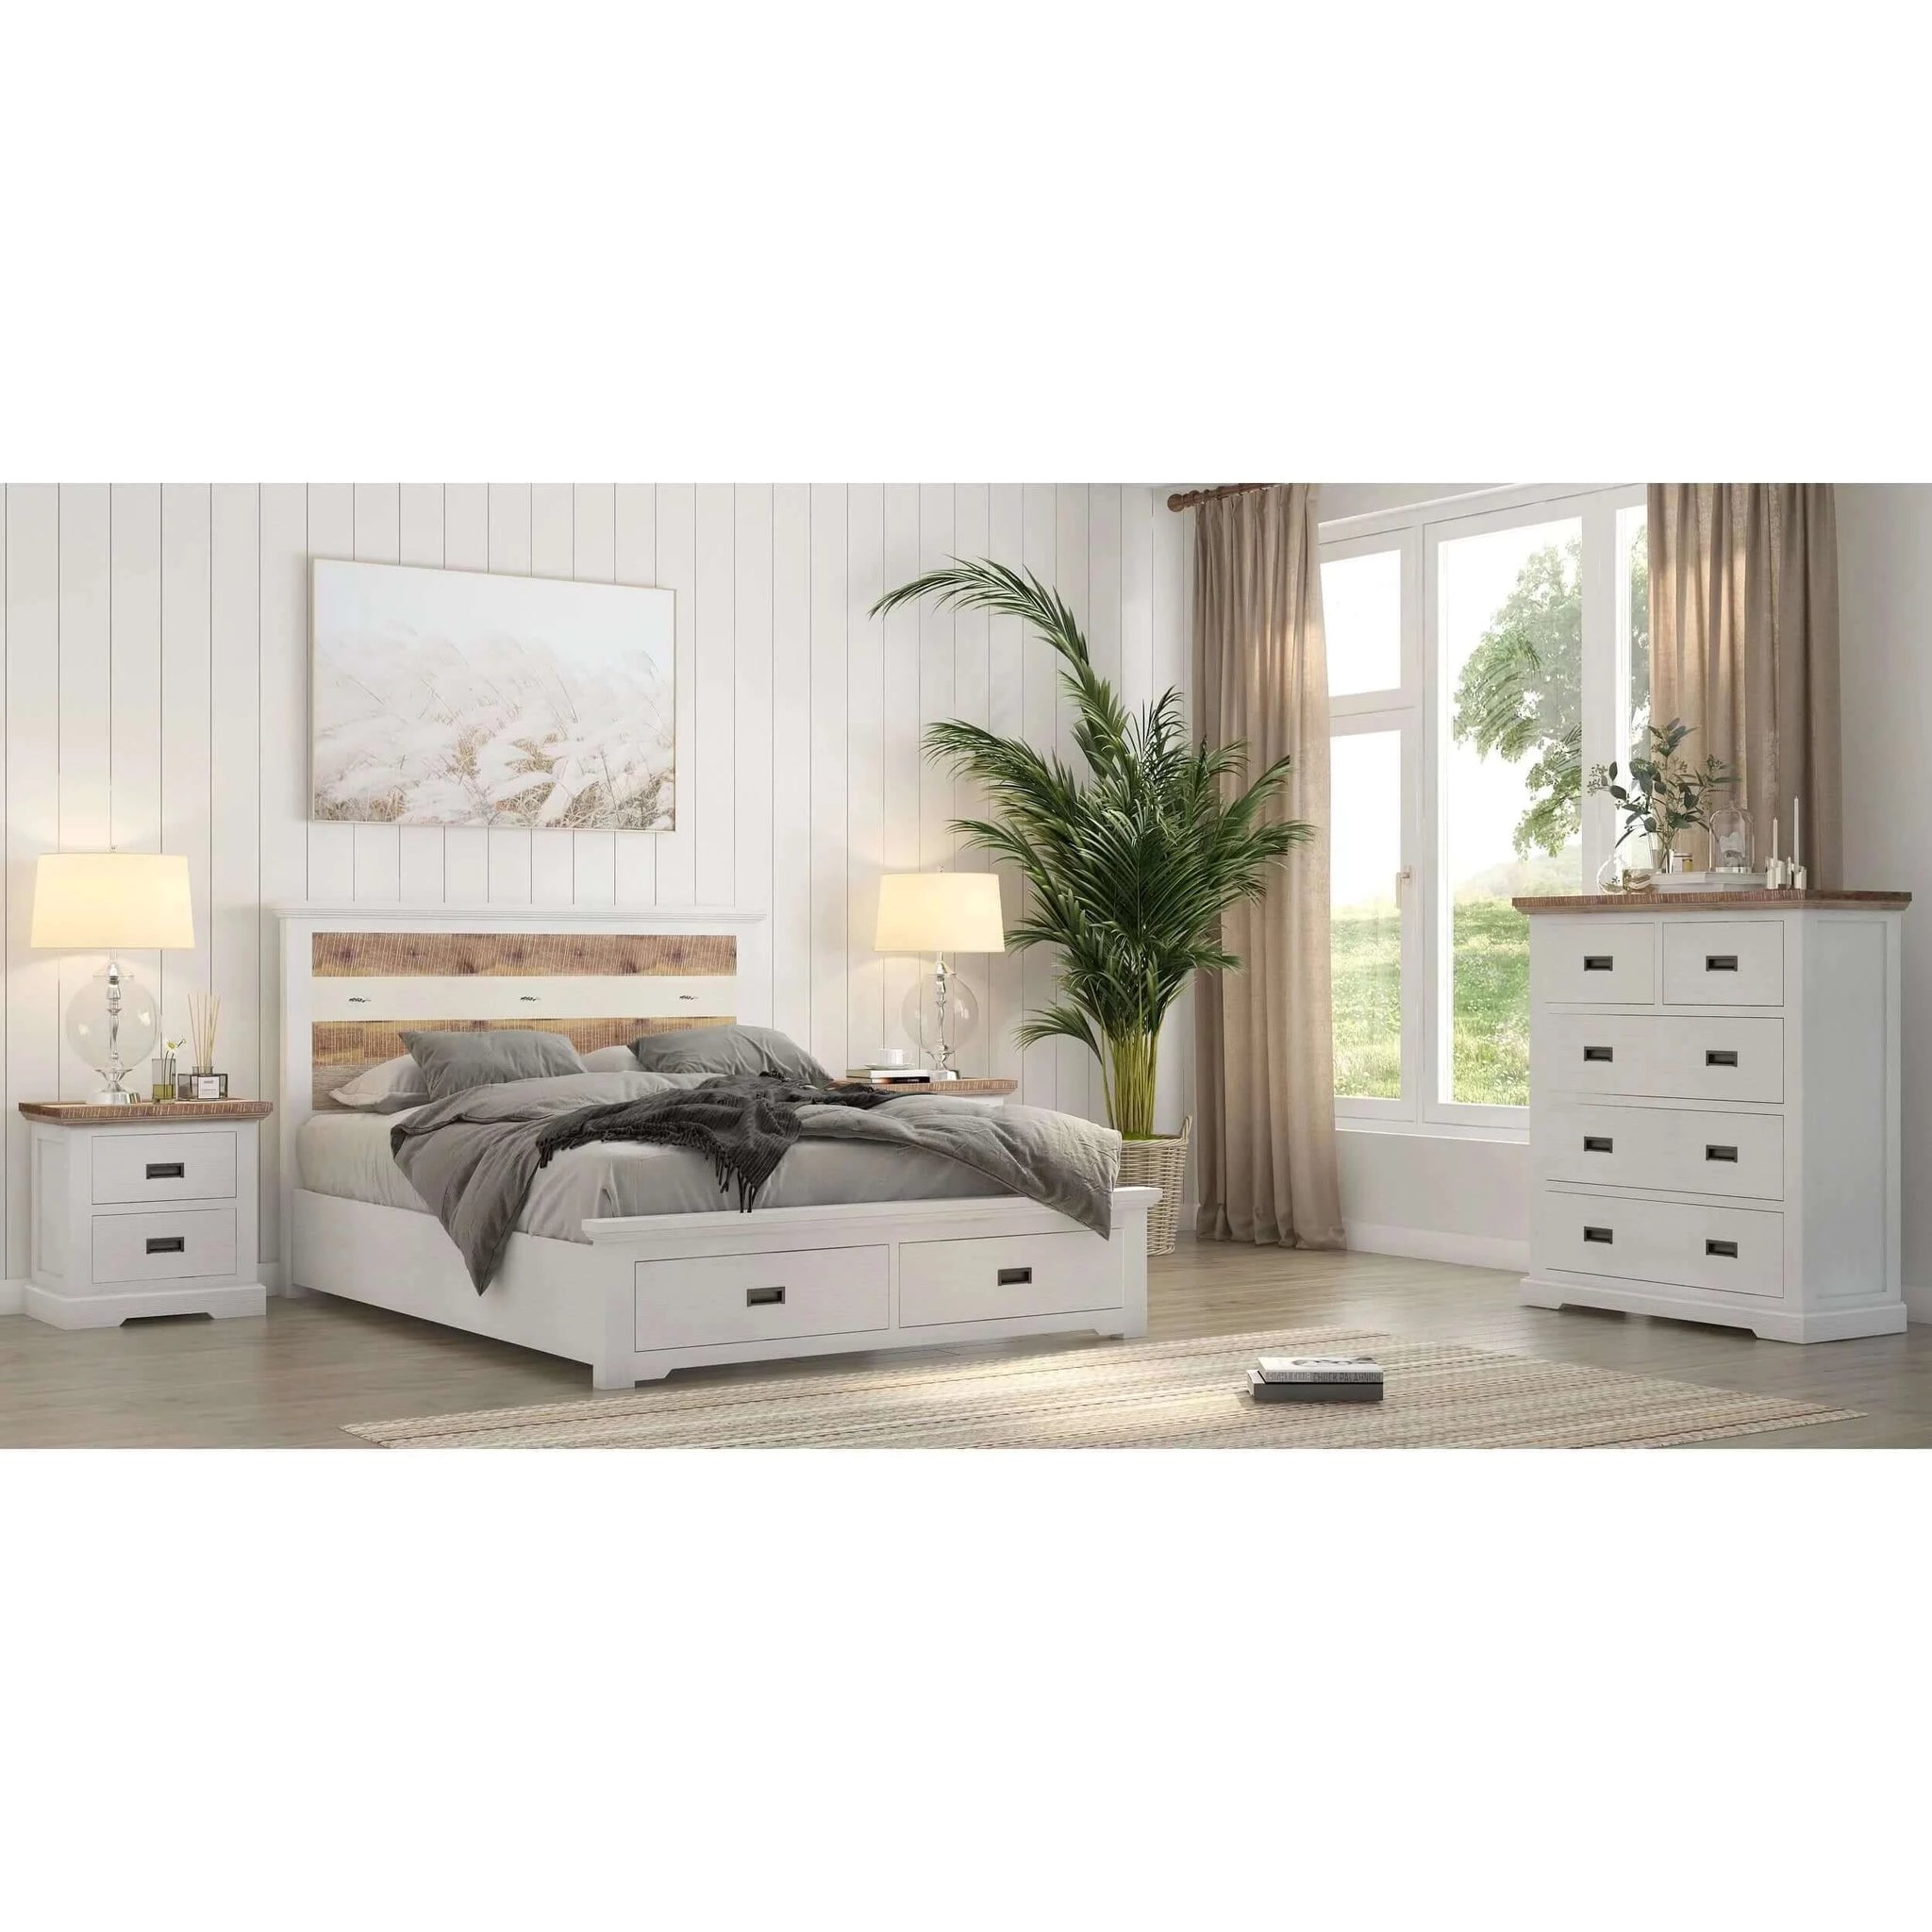 Buy orville 4pc queen bed frame suite bedside tallboy furniture package -multi color - upinteriors-Upinteriors